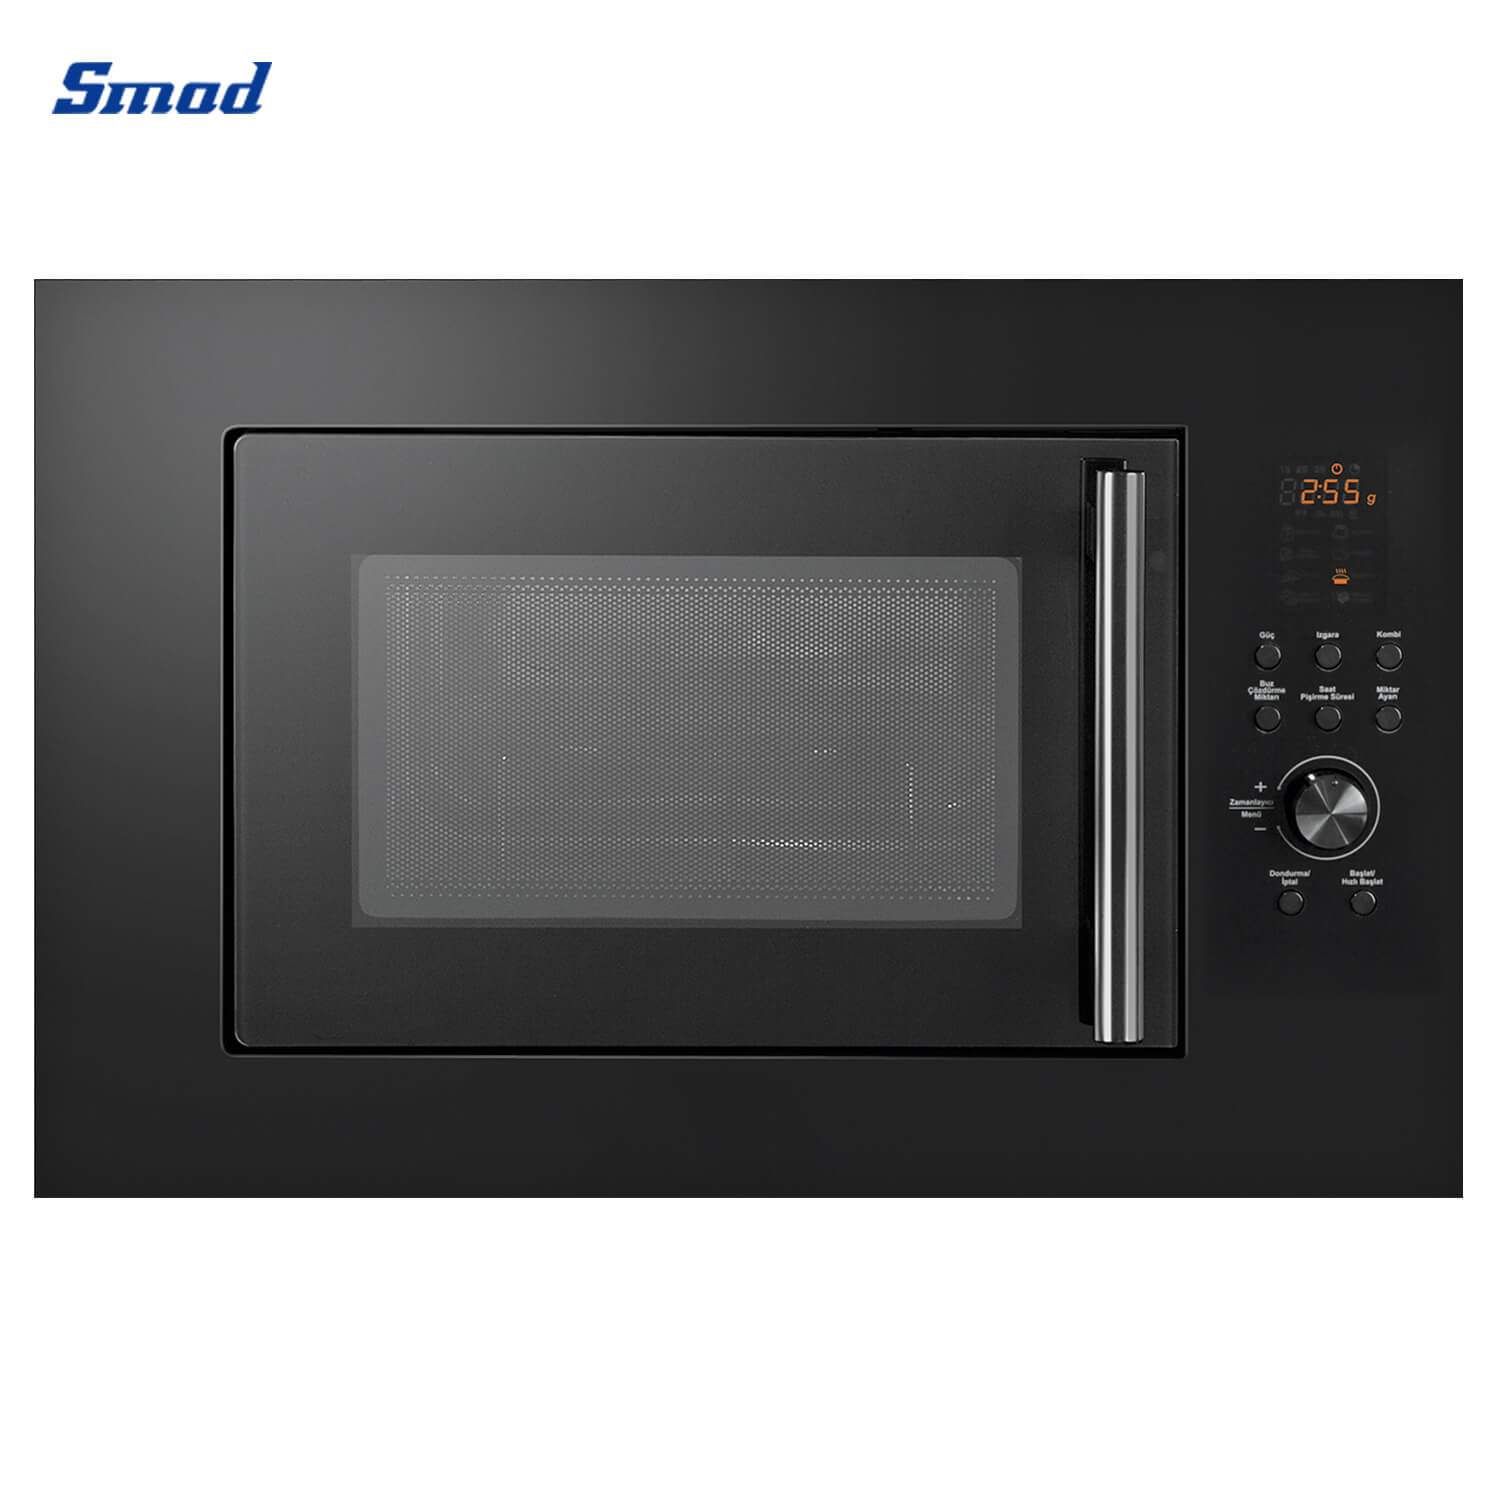 Smad Microwave Oven Wall Combine Gill function